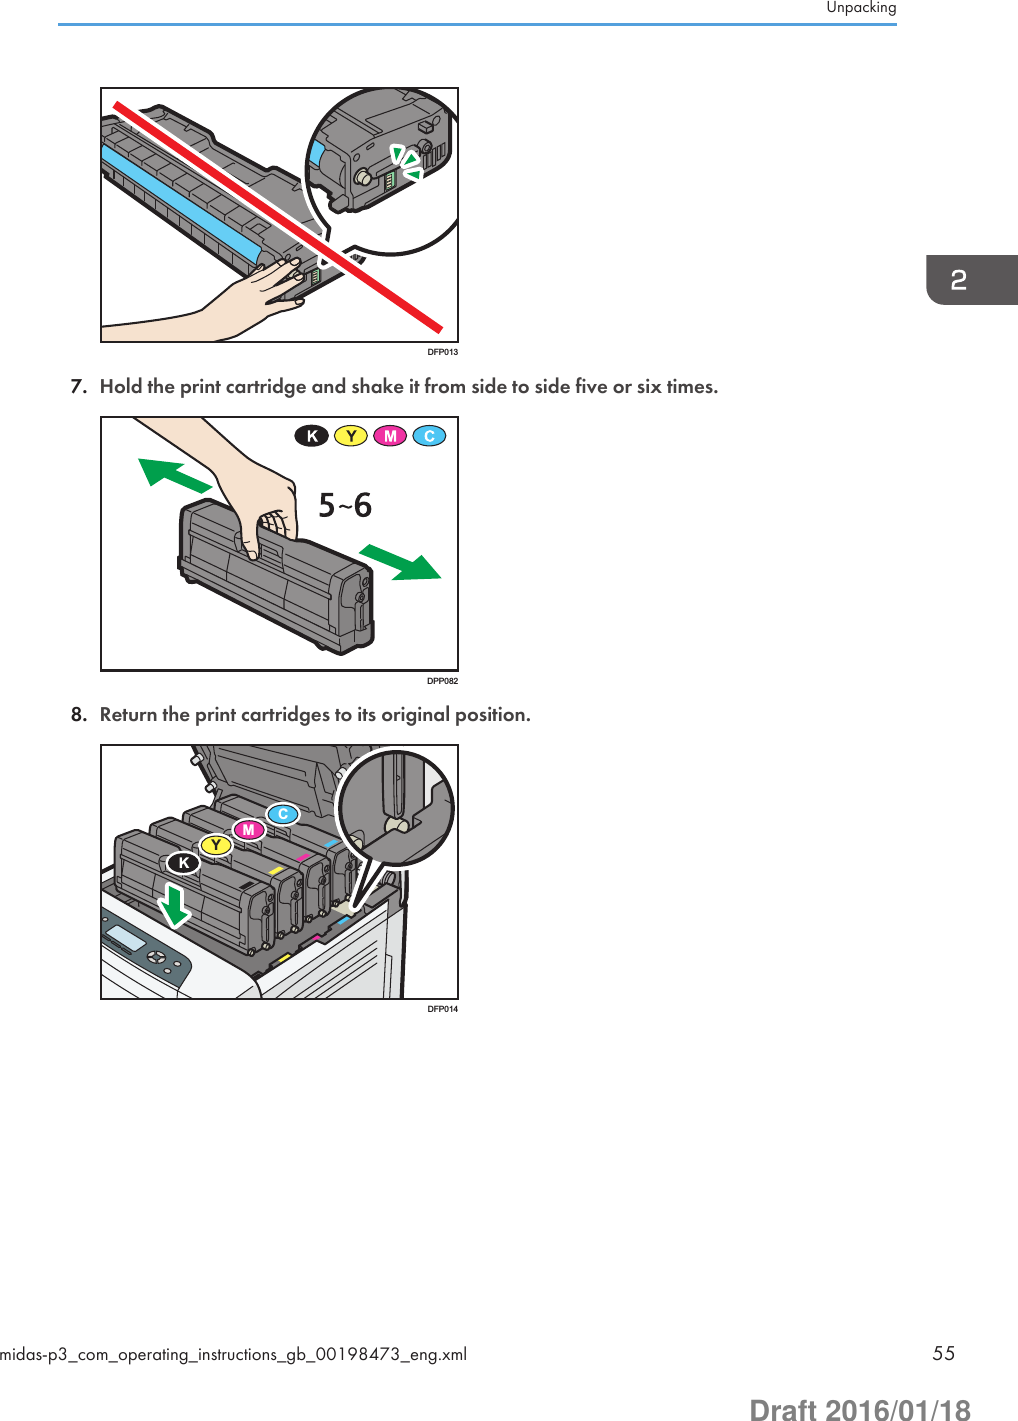 DFP0137. Hold the print cartridge and shake it from side to side five or six times.DPP0828. Return the print cartridges to its original position.MCYKDFP014Unpackingmidas-p3_com_operating_instructions_gb_00198473_eng.xml 55Draft 2016/01/18